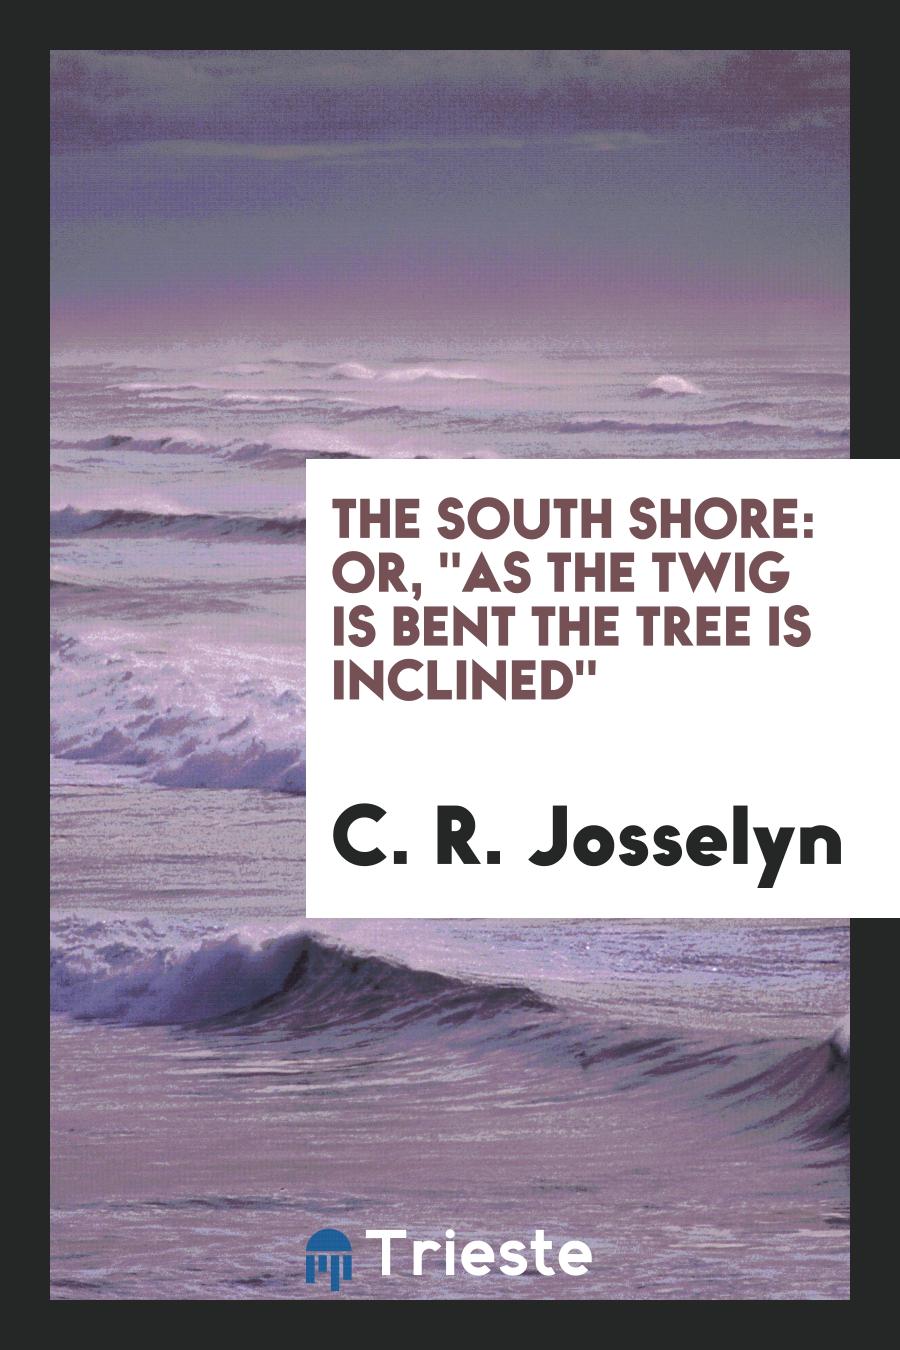 The South Shore: Or, "As the Twig is Bent the Tree is Inclined"